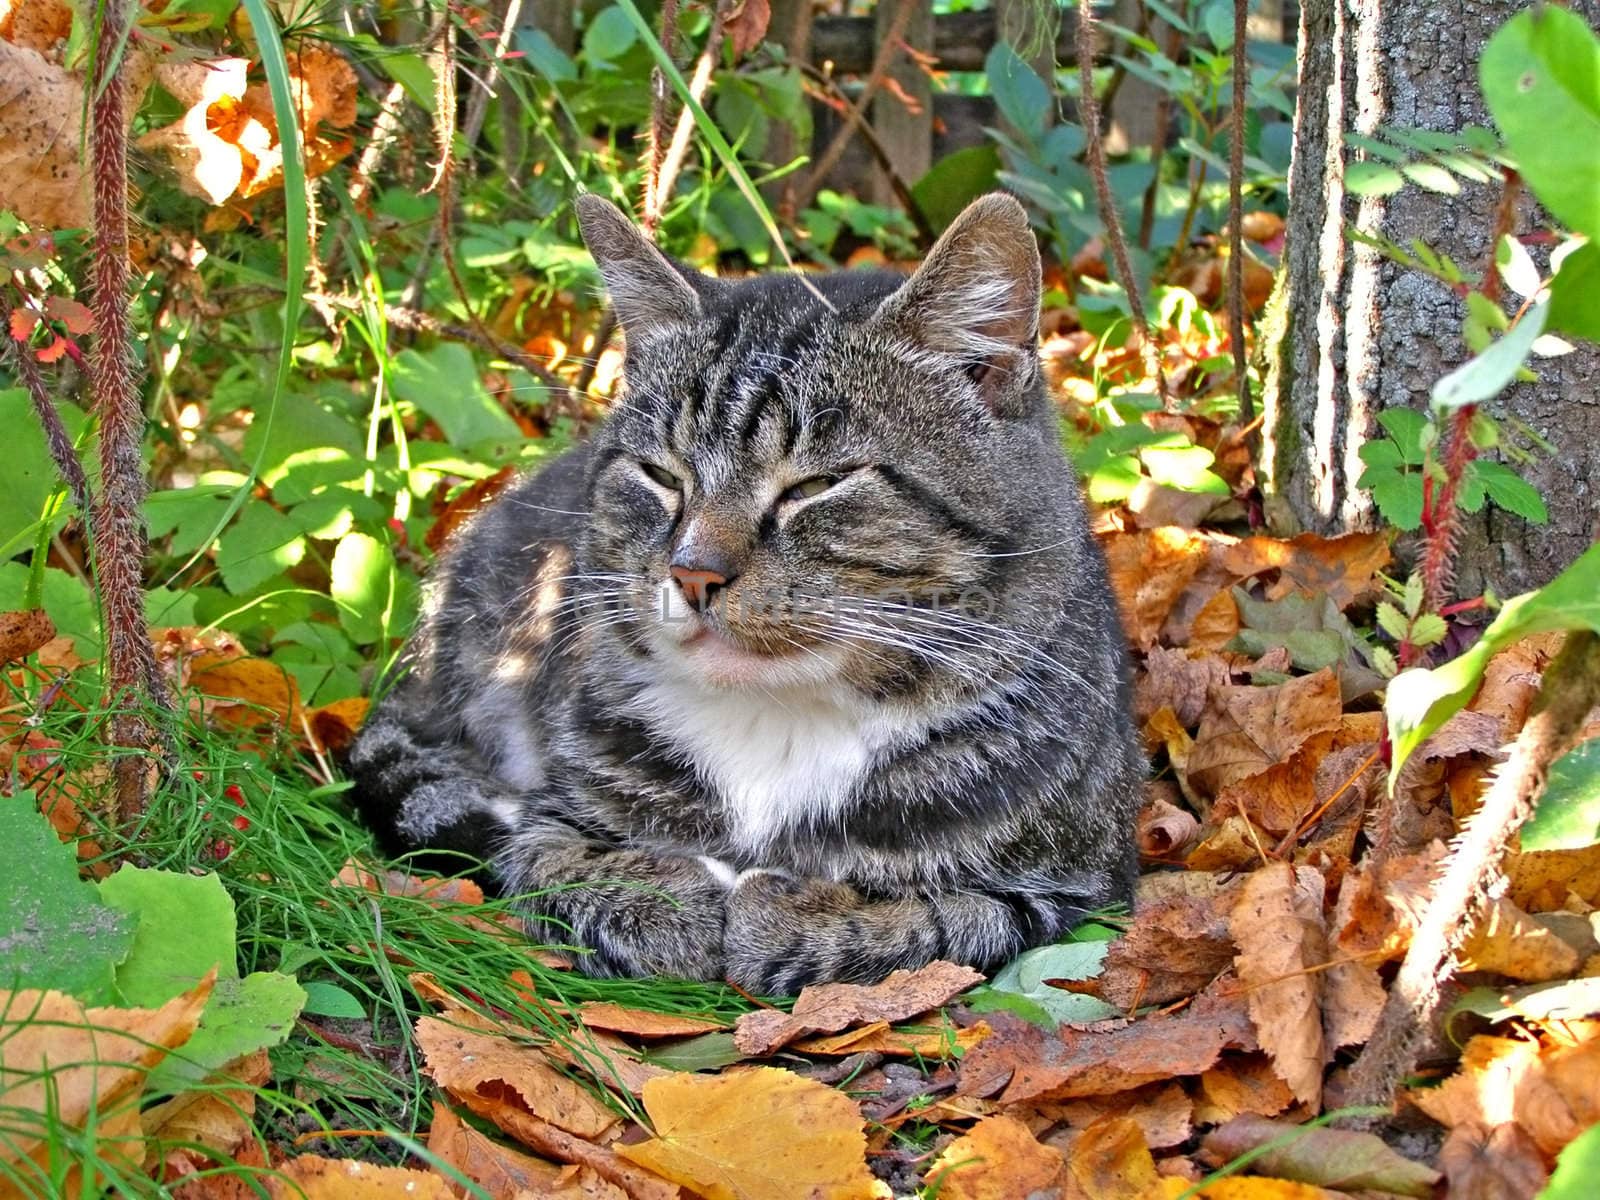 complacent cat amongst autumn herb by basel101658